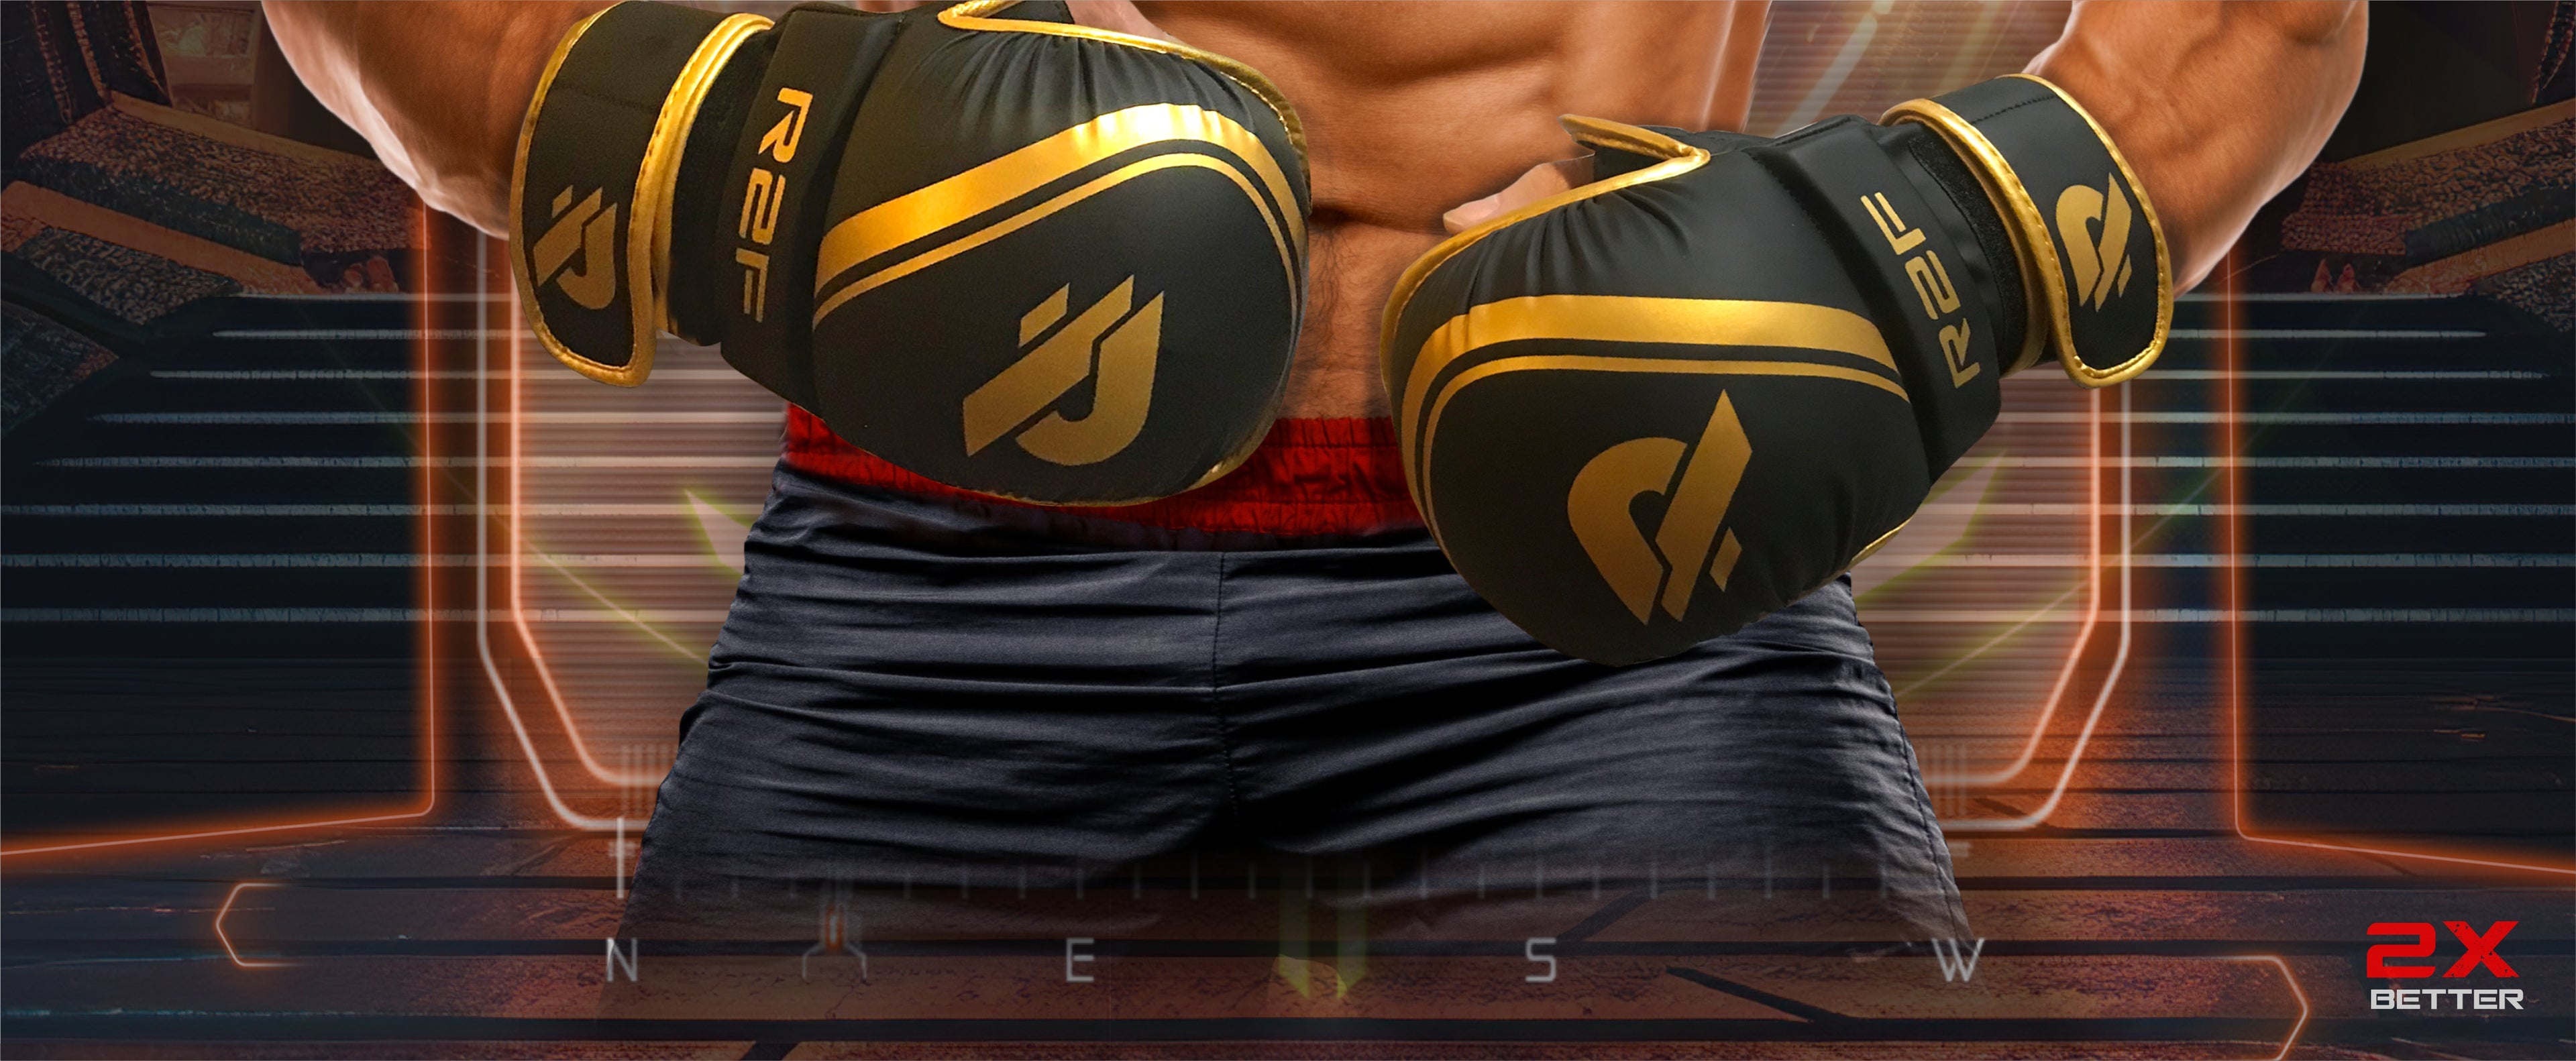 Elevate your MMA game with R2F MMA Gloves – perfect for grappling, training, and sparring. Crafted with adjustable wrist support, vegan leather, and open palm design, ideal for UFC, Muay Thai, and boxing. Unleash your combat prowess with superior protection and style.